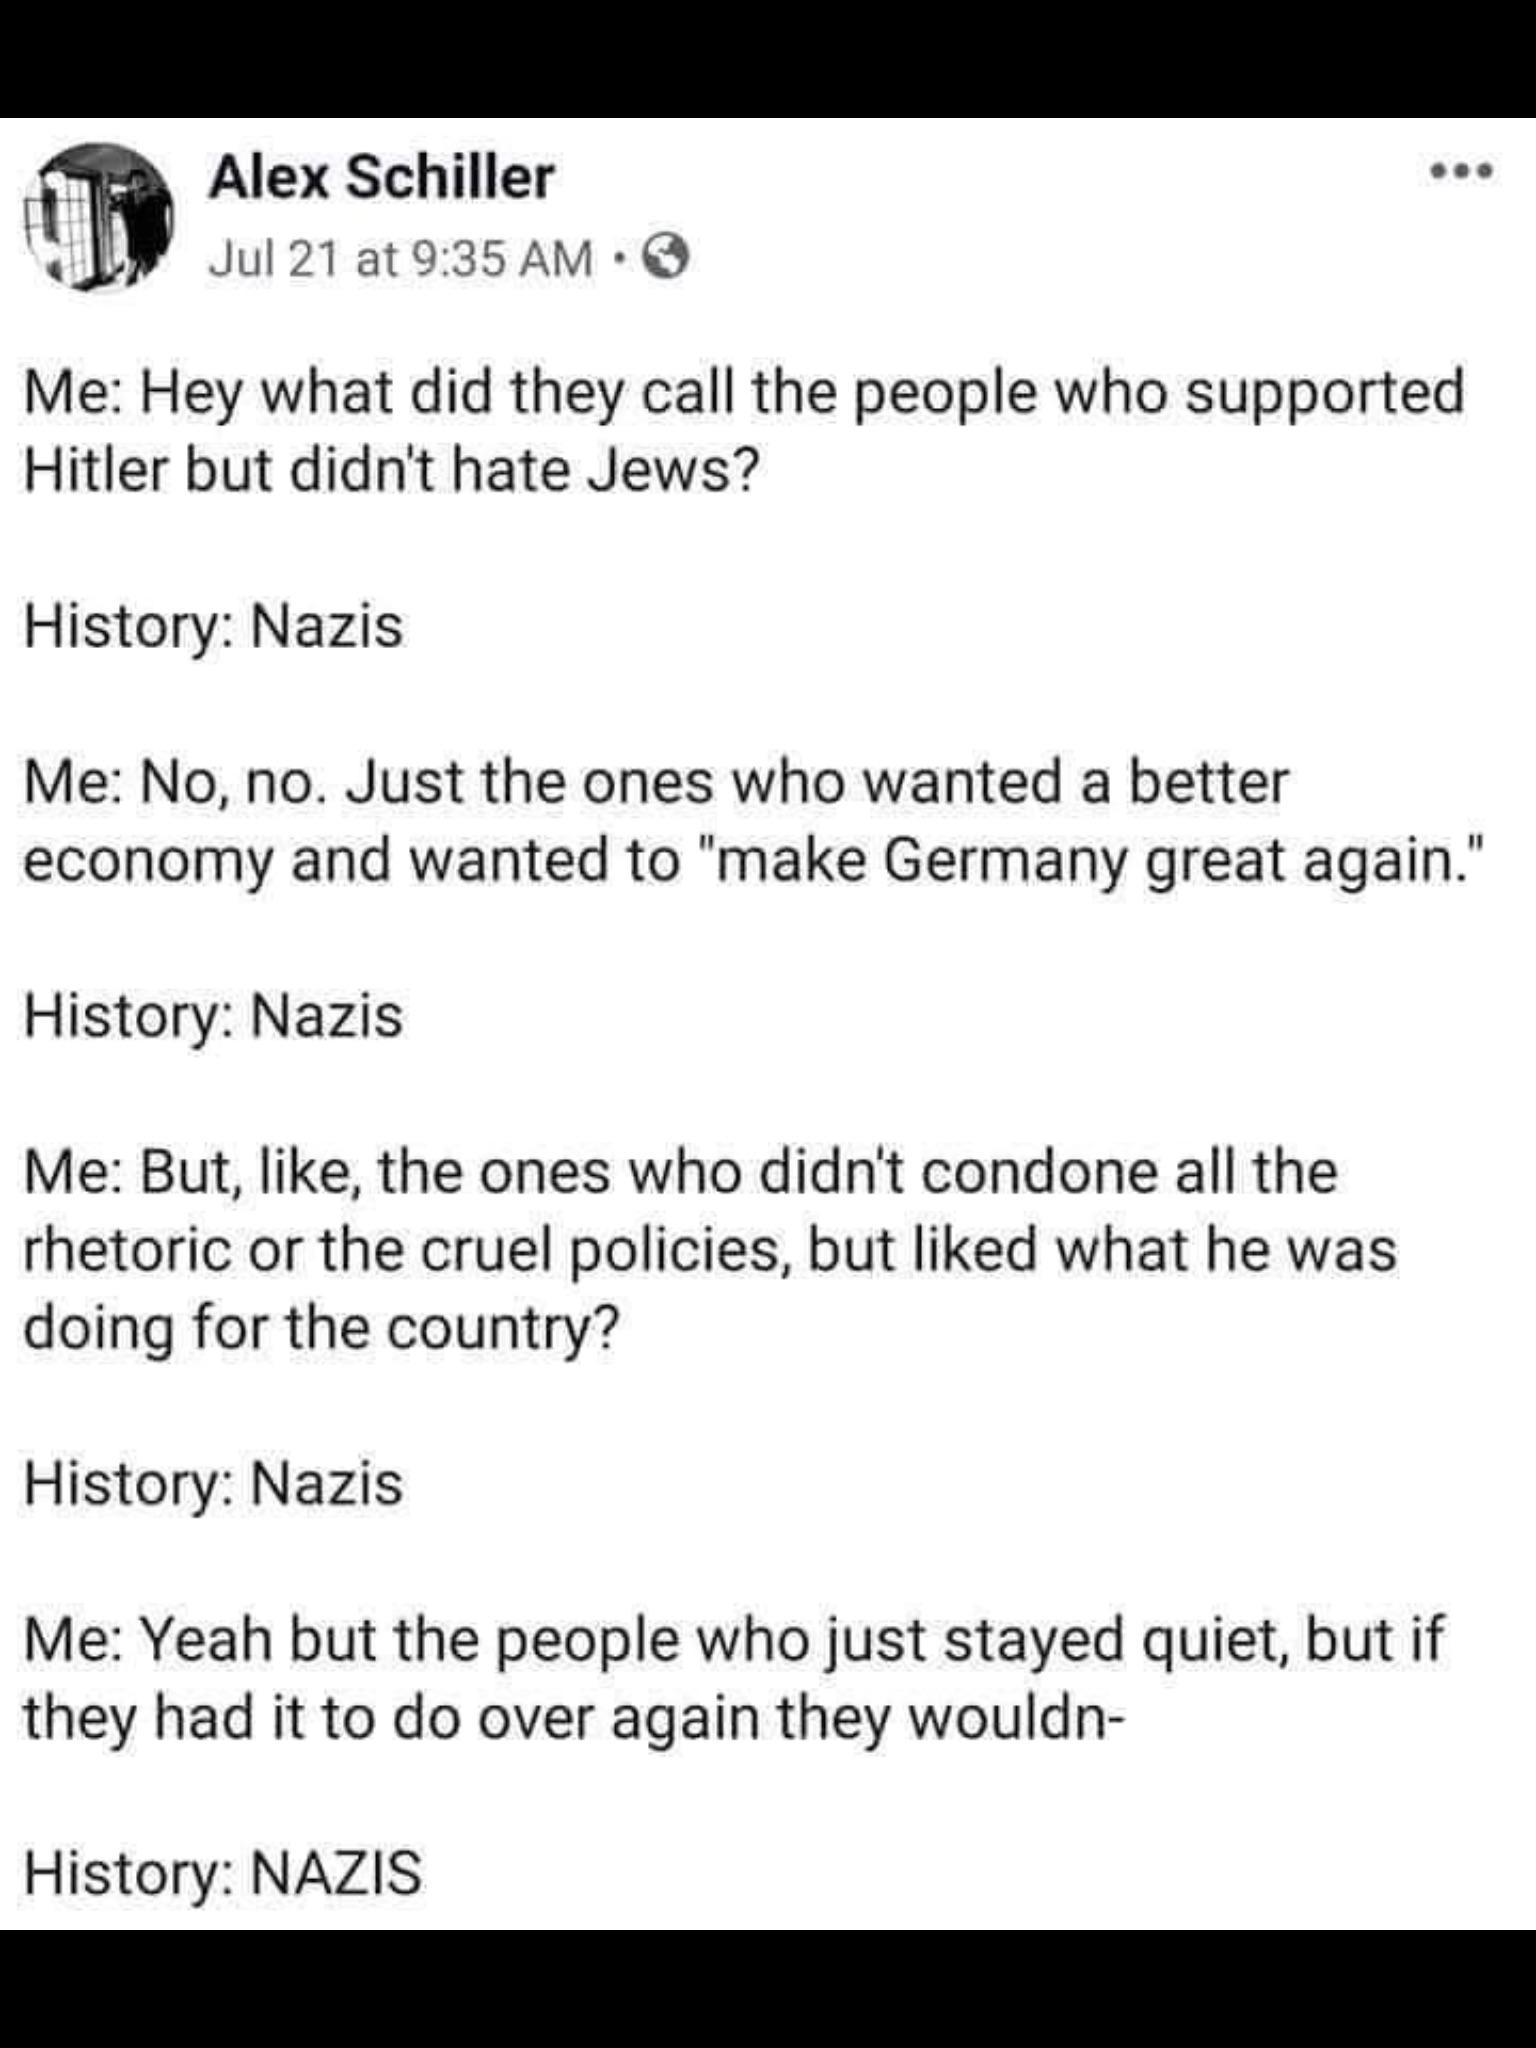 political political-memes political text: Alex Schiller Jul 21 at 9:35 AM •O Me: Hey what did they call the people who supported Hitler but didn't hate Jews? History: Nazis Me: No, no. Just the ones who wanted a better economy and wanted to 